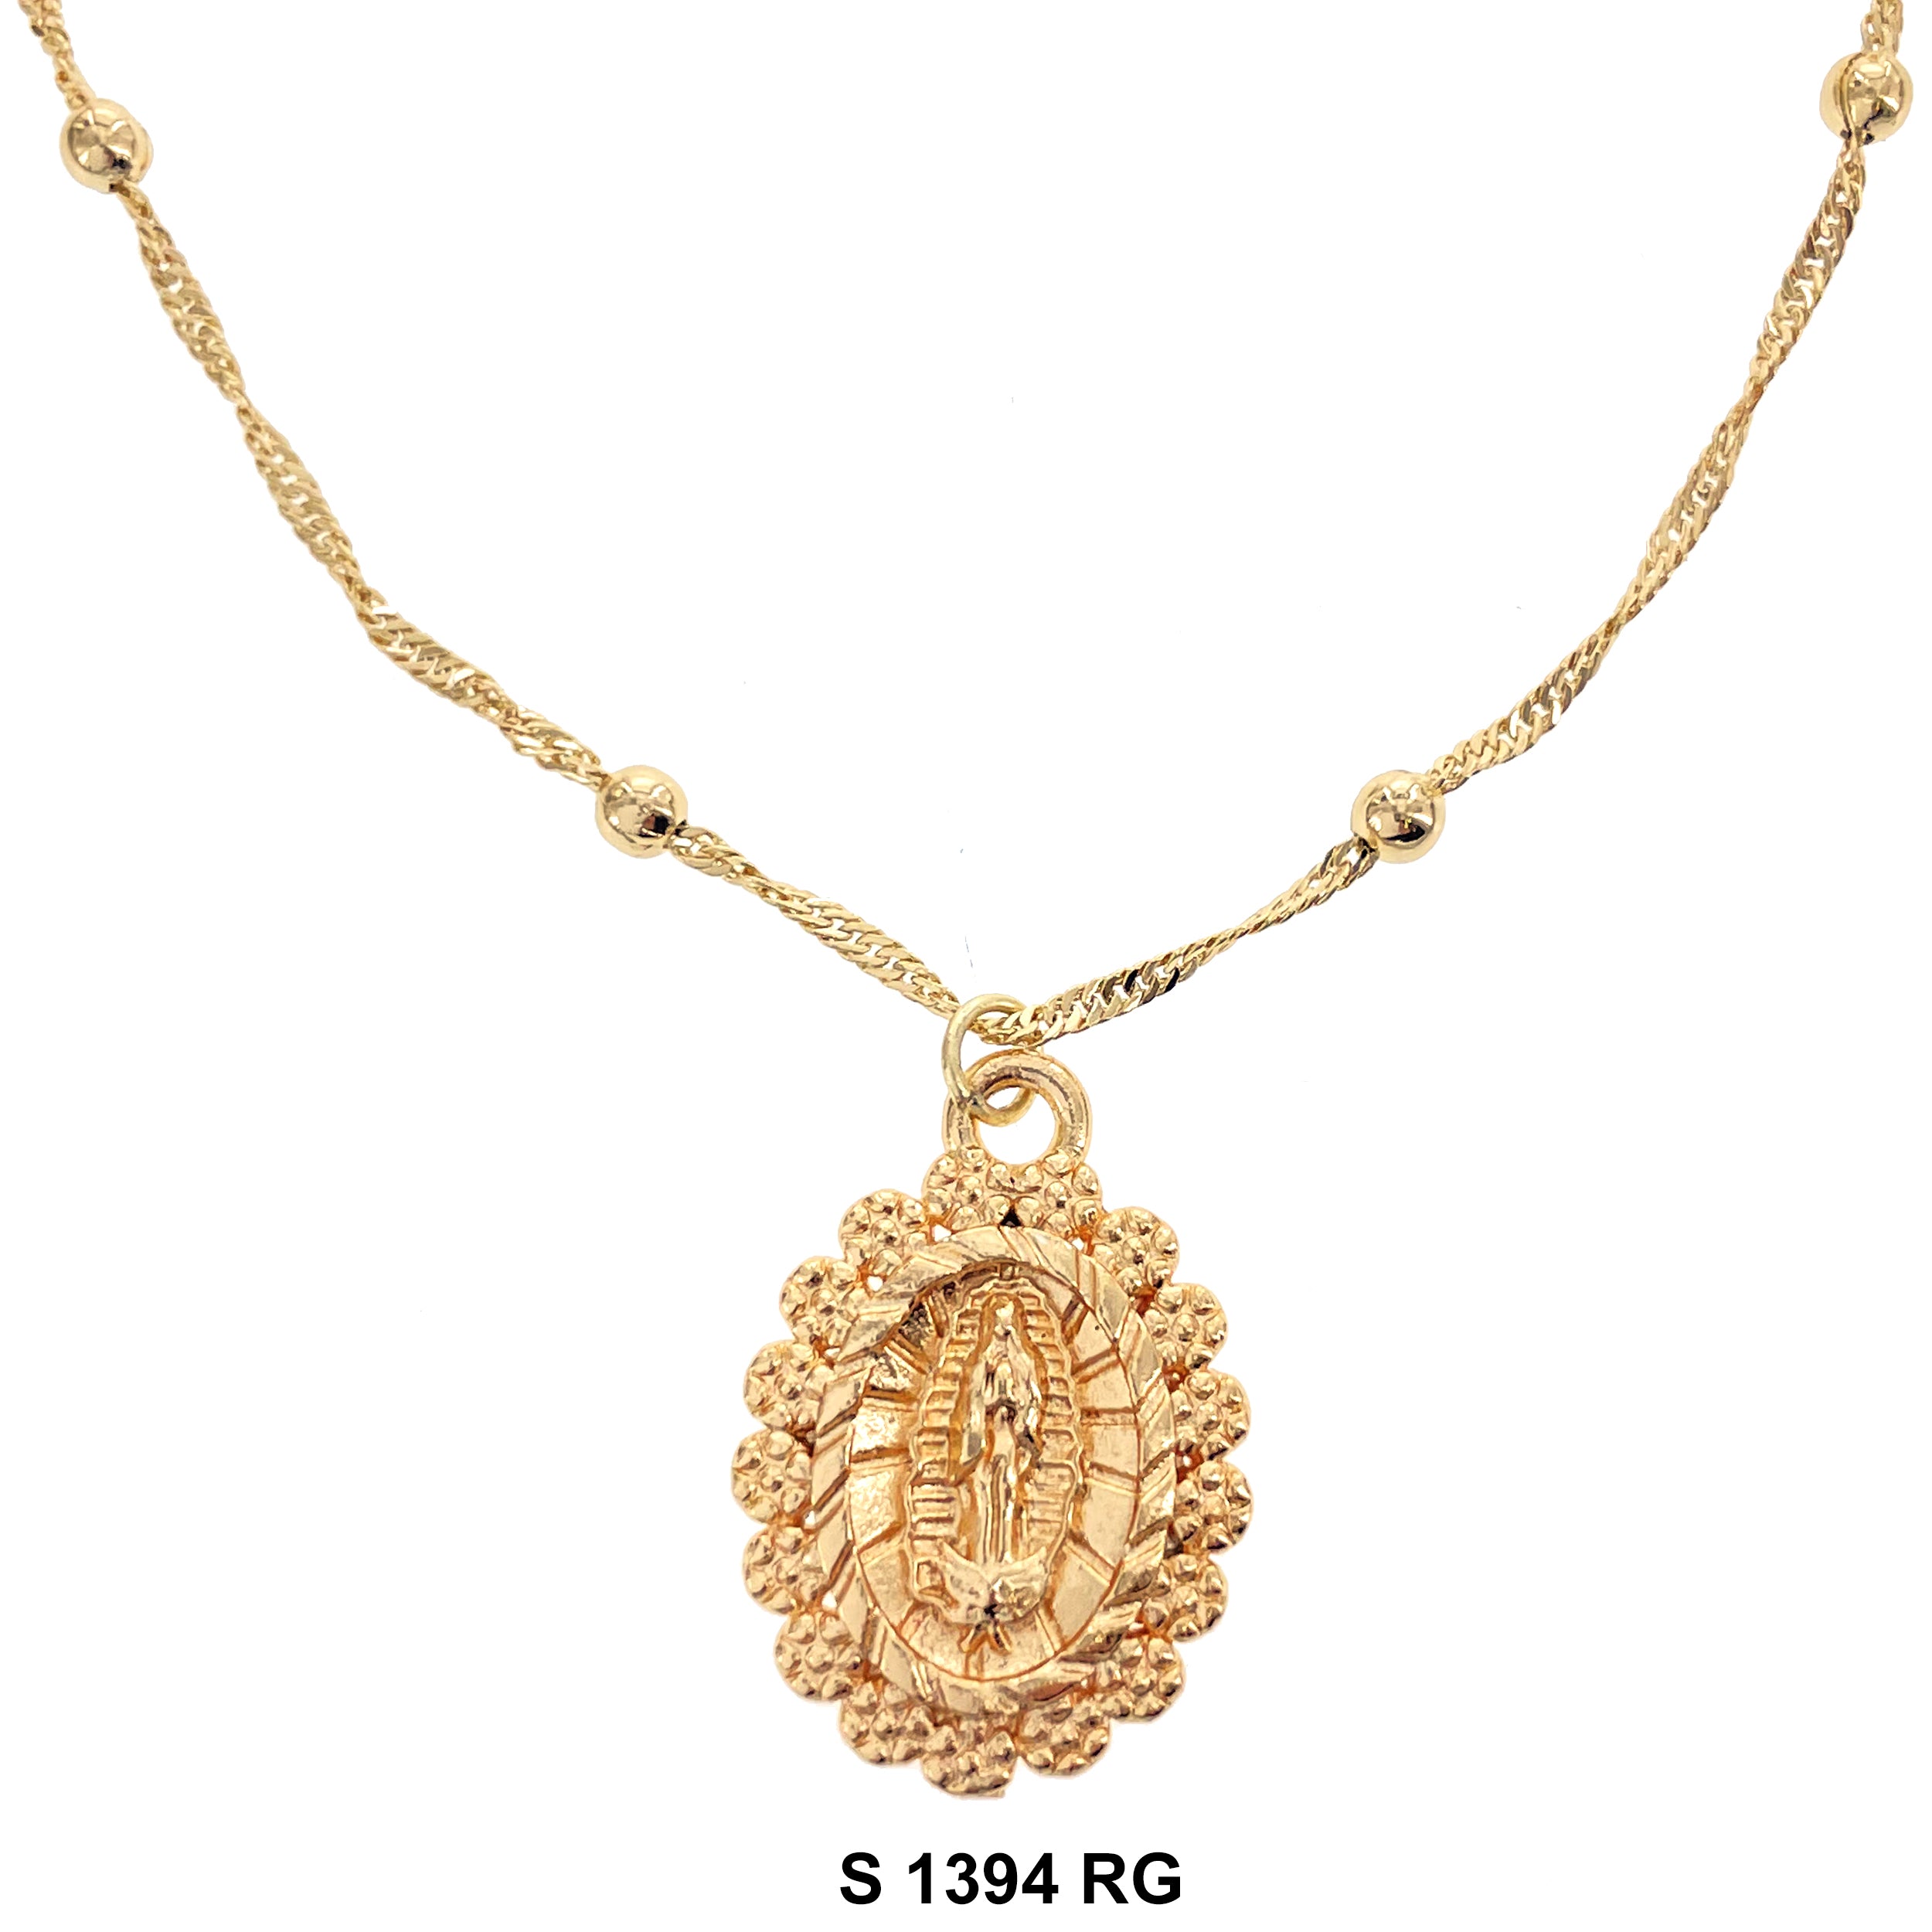 Guadalupe Necklace Set S 1394 RG